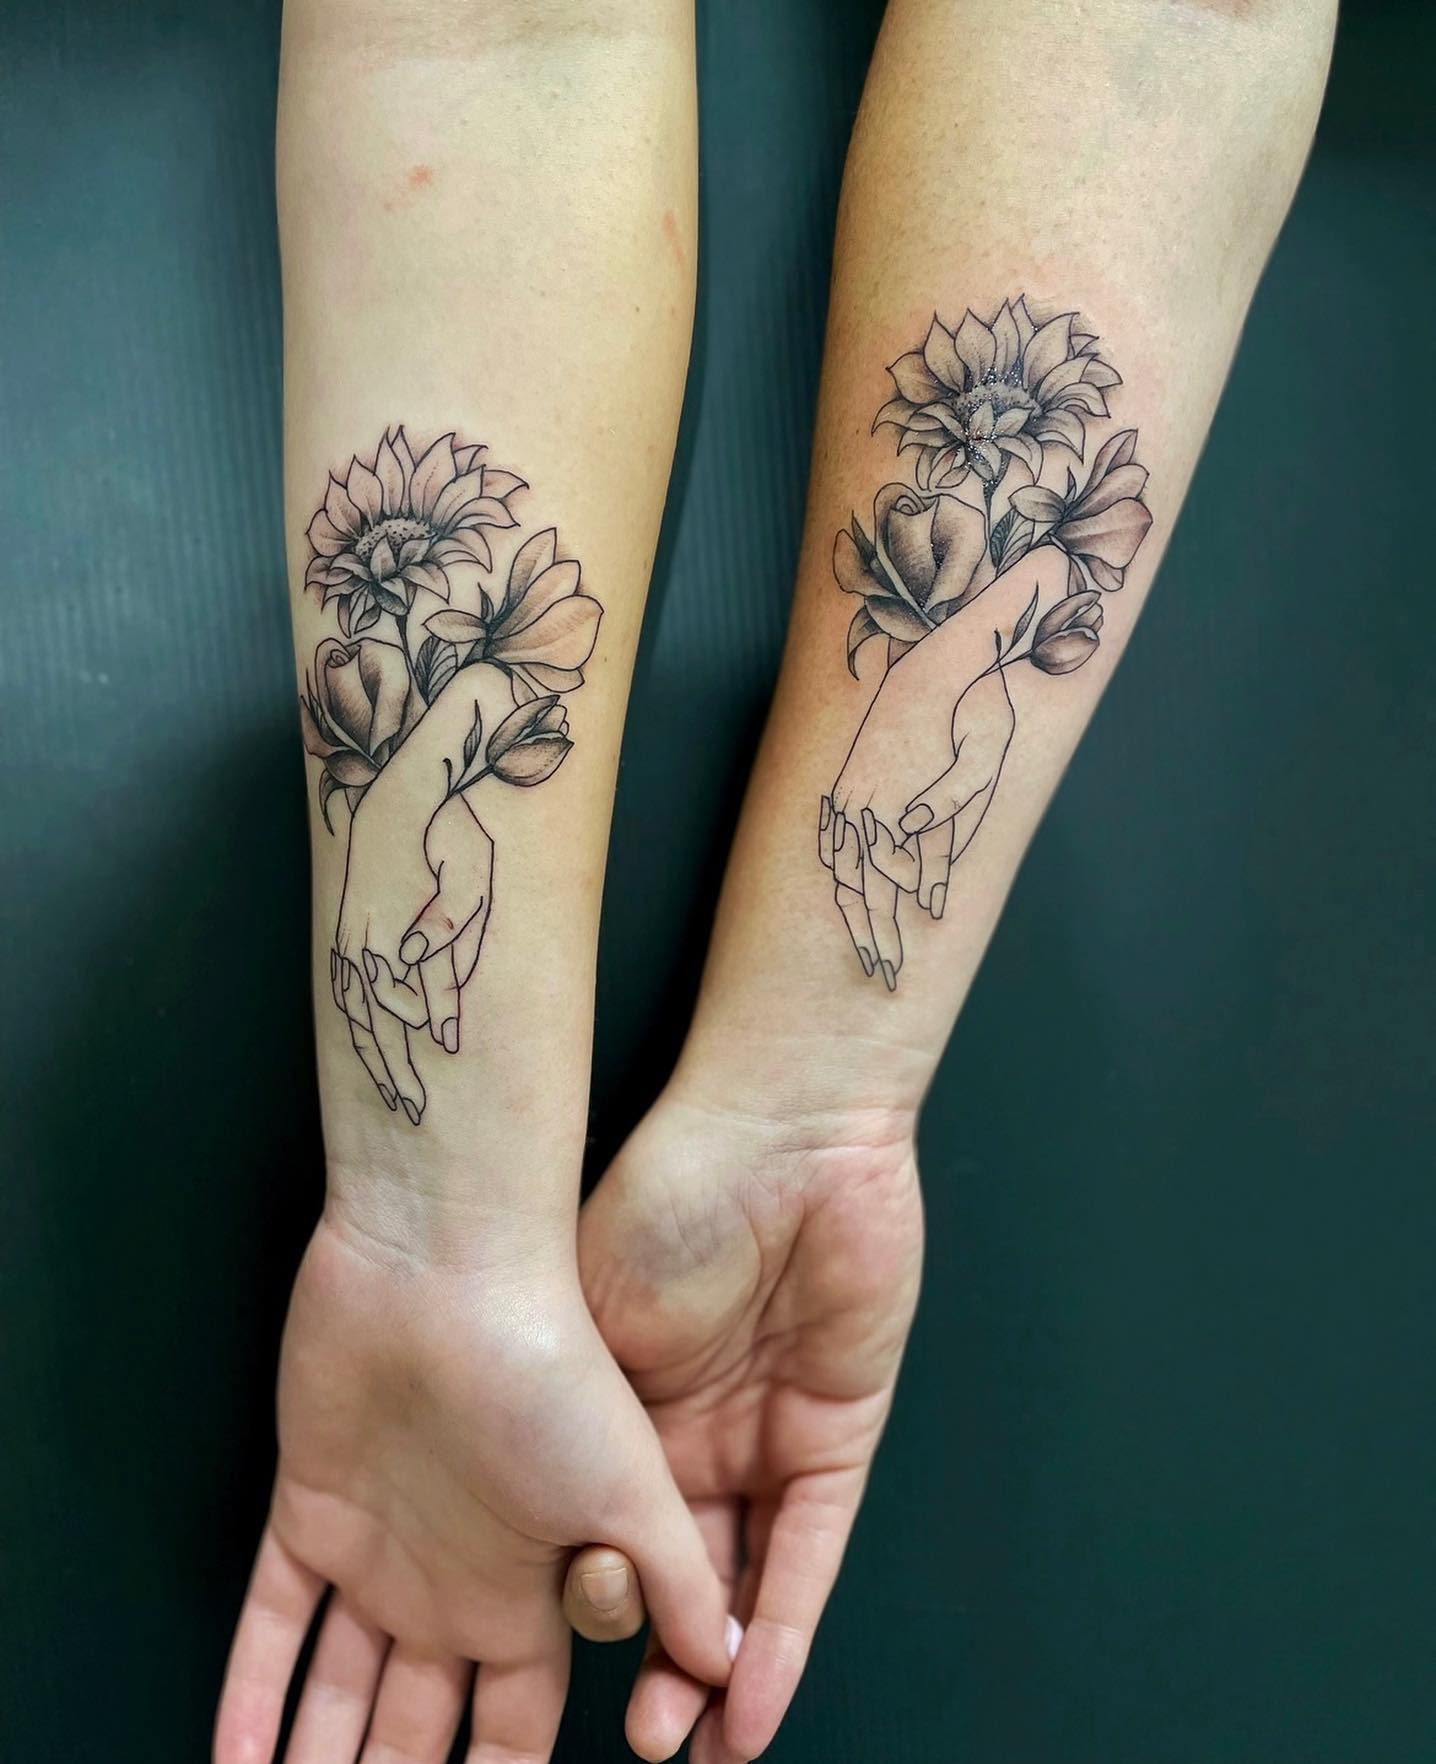 Holding Hands Tattoo with Flower for Mom and Daughter